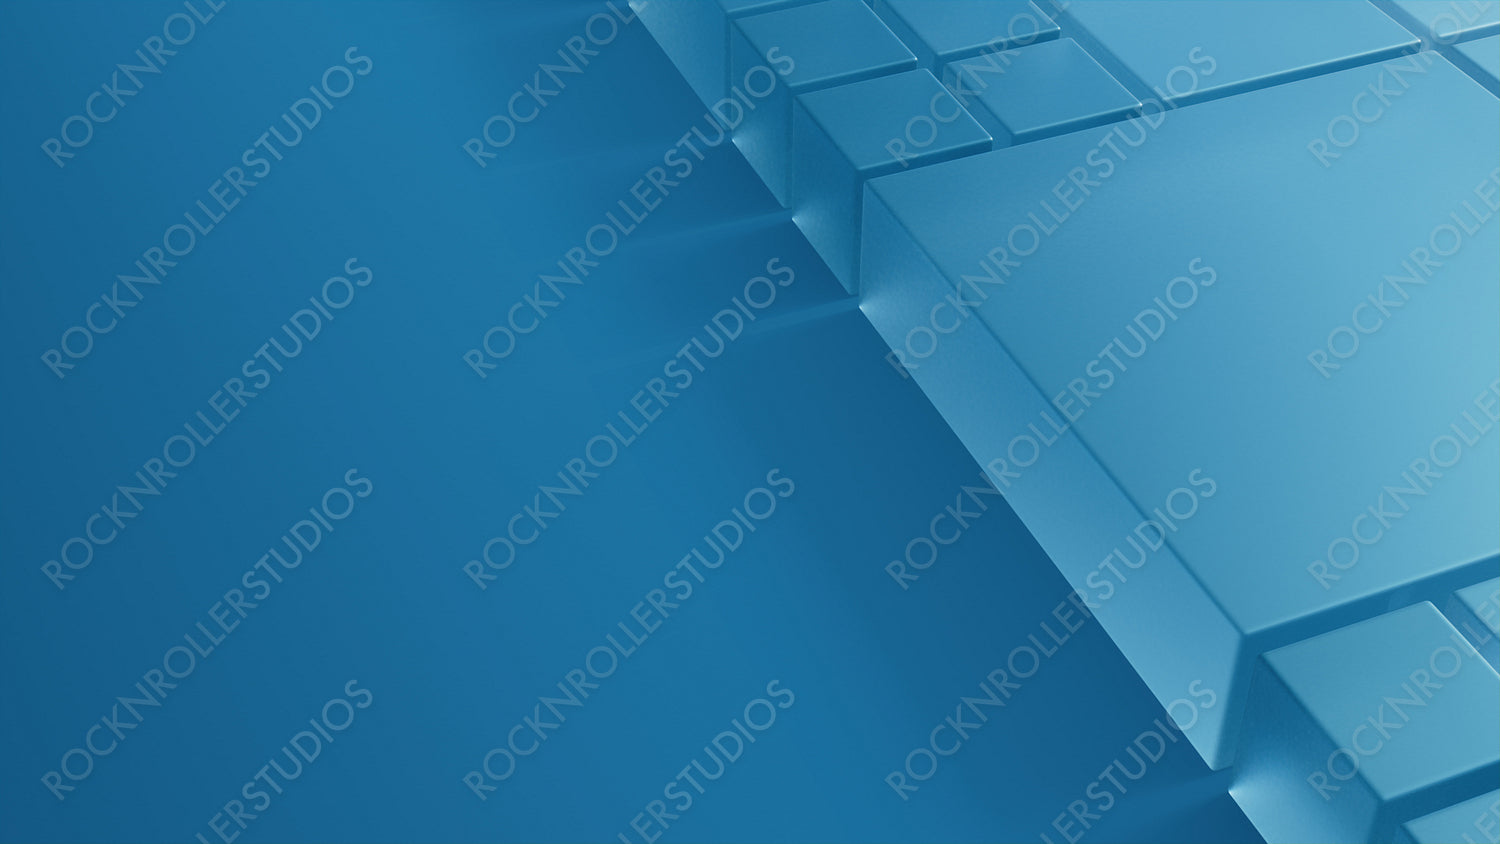 Acrylic Blocks on a Blue Surface. Visionary Tech Concept with copy space. 3D Render.